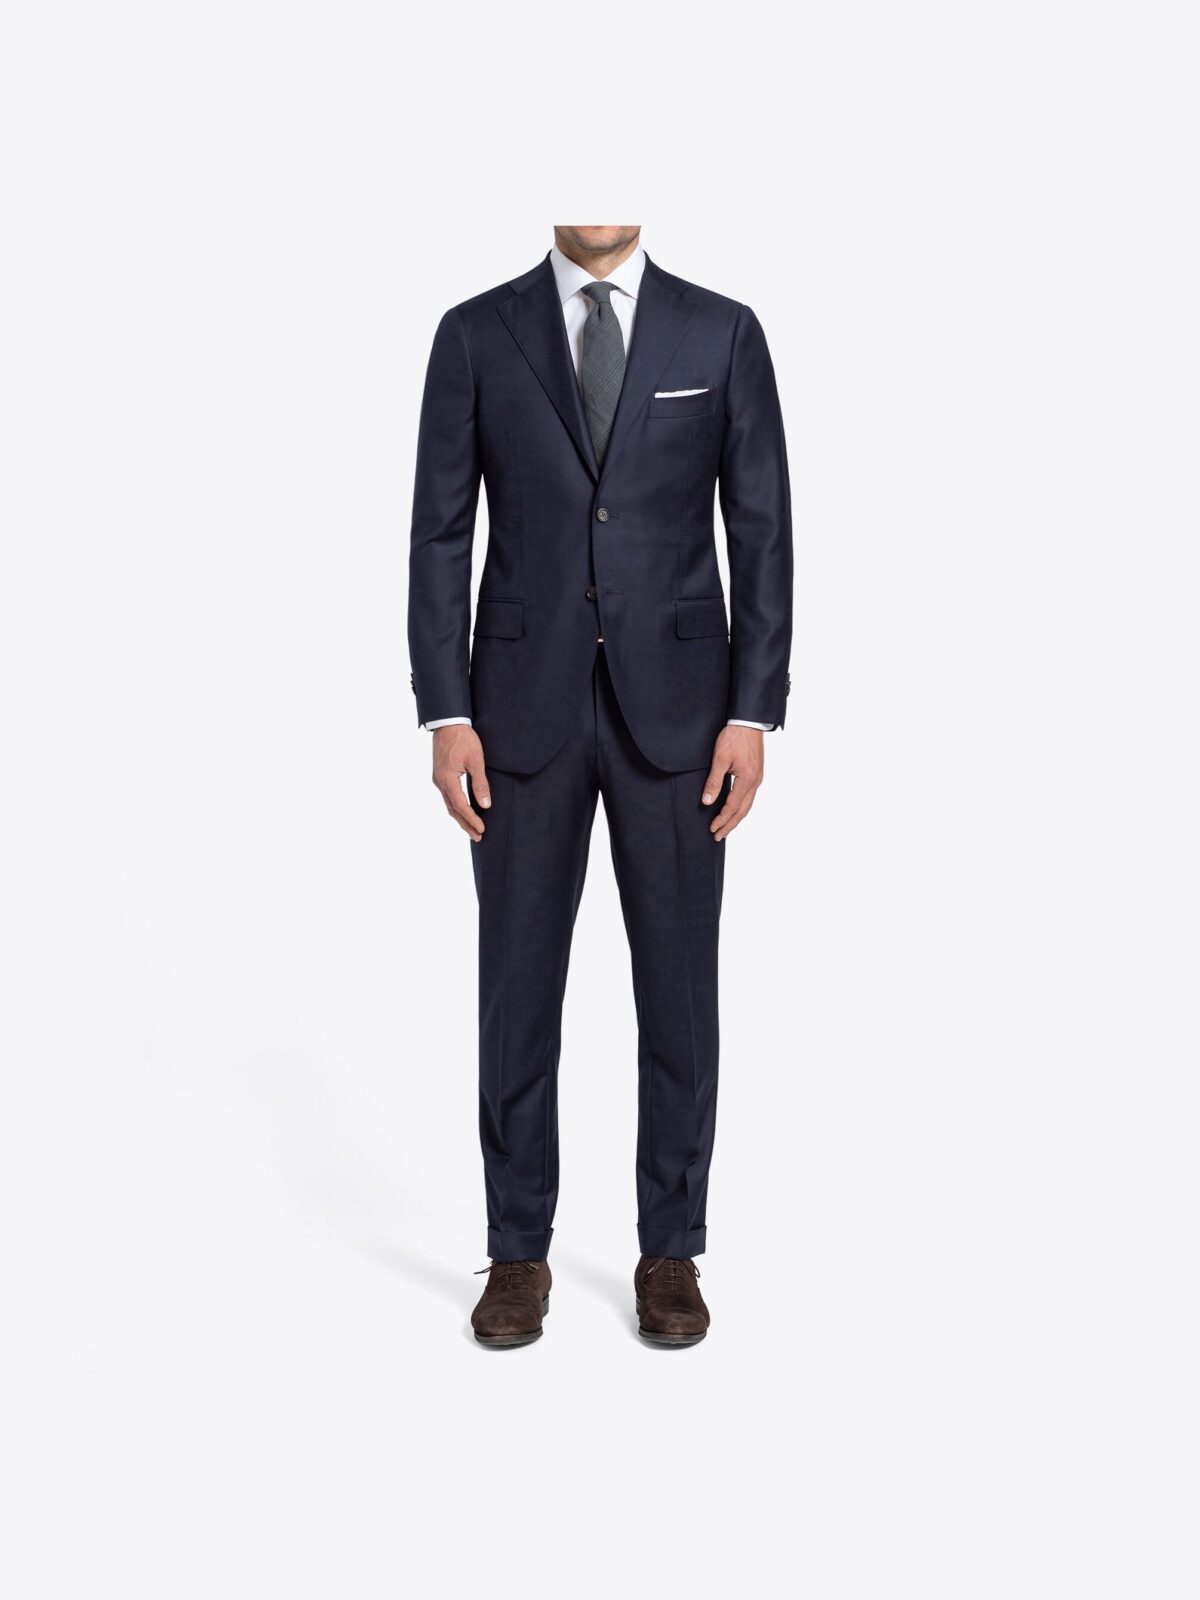 Allen Navy S110s Wool Suit with Cuffed Trouser - Custom Fit Tailored  Clothing